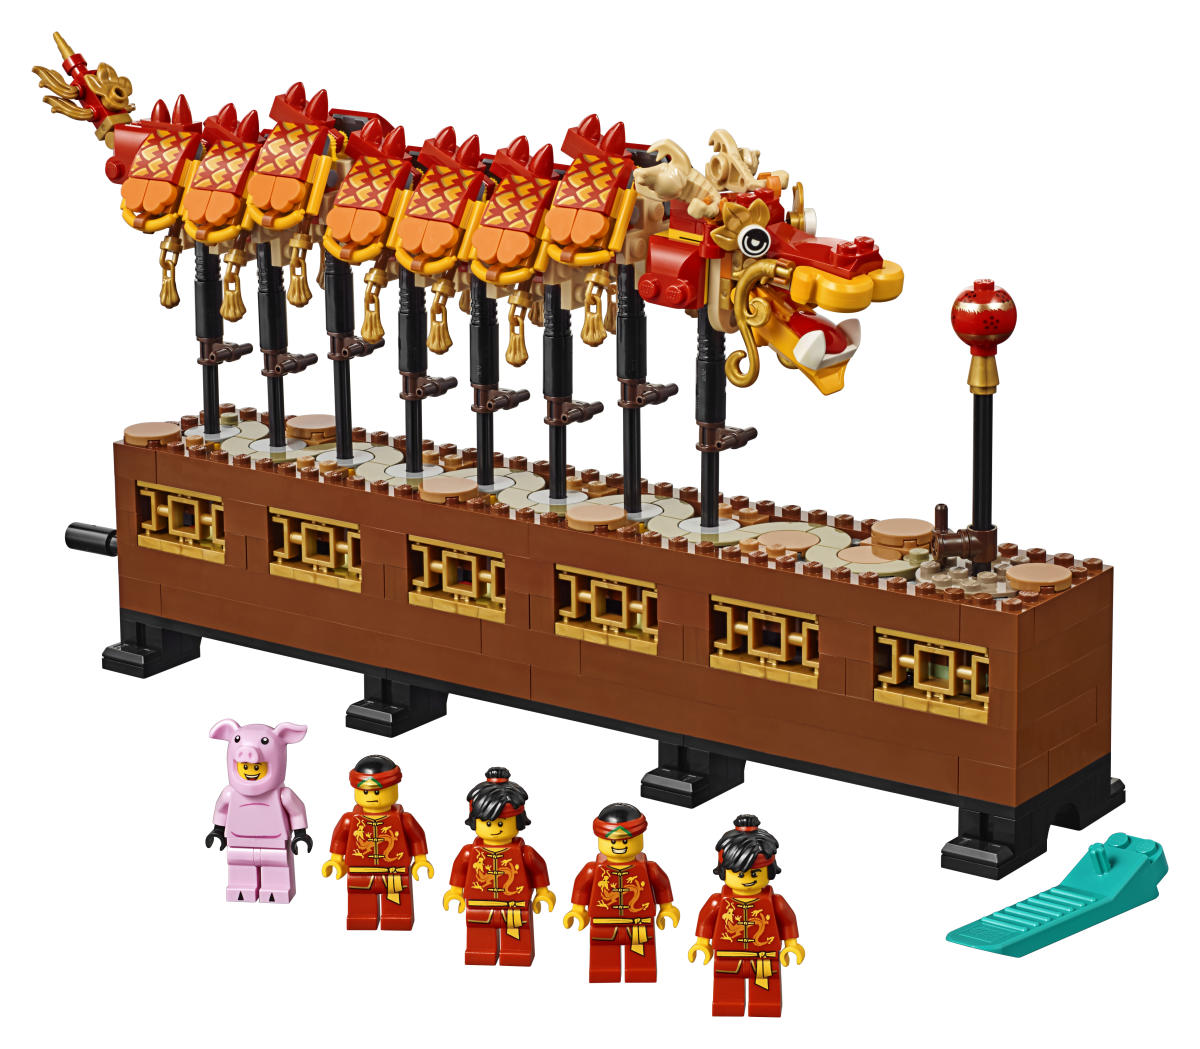 Review: We built this sold-out Lego Dragon Dance set just in time for CNY